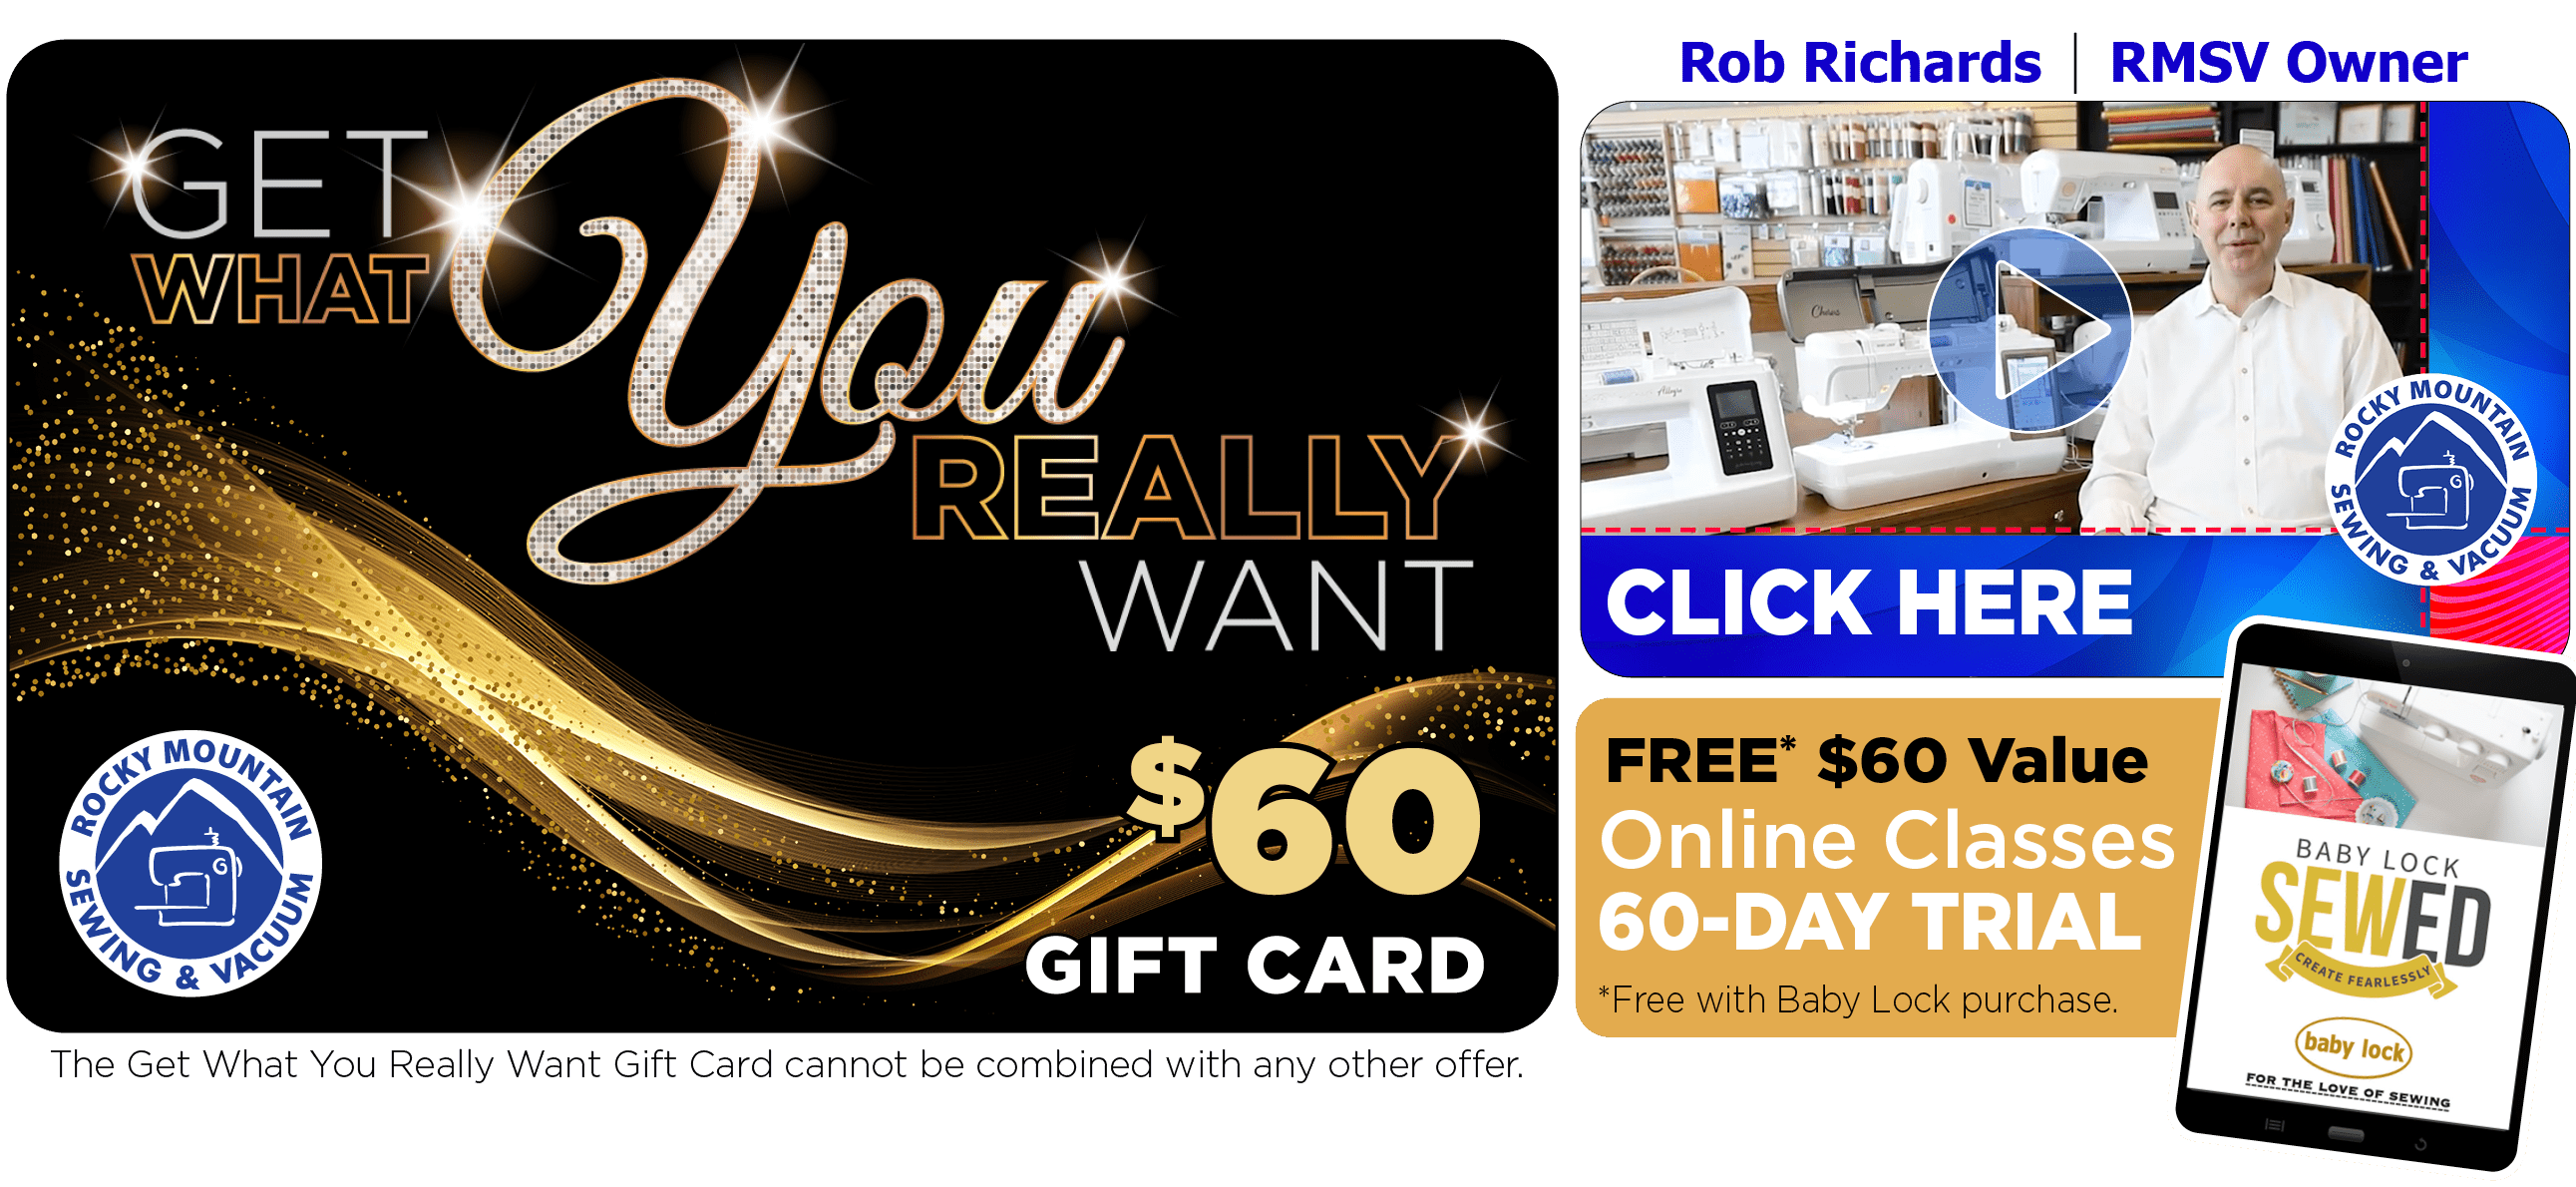 Get What You Really Want $60 Gift Card with Purchase